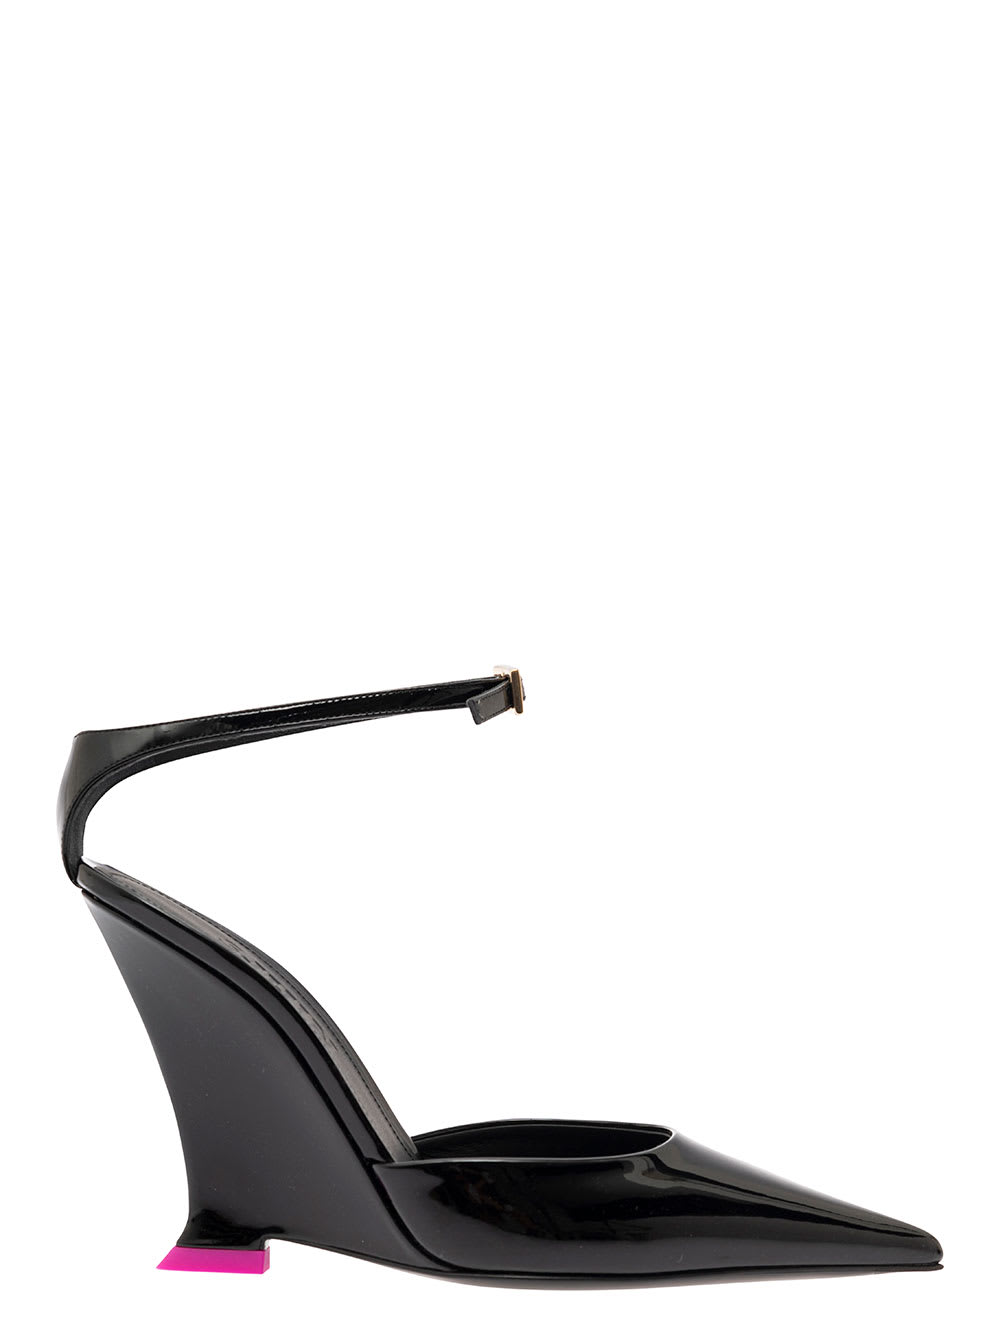 clea Black Pumps With Wedge Heel And Contrasting Detail In Leather Woman